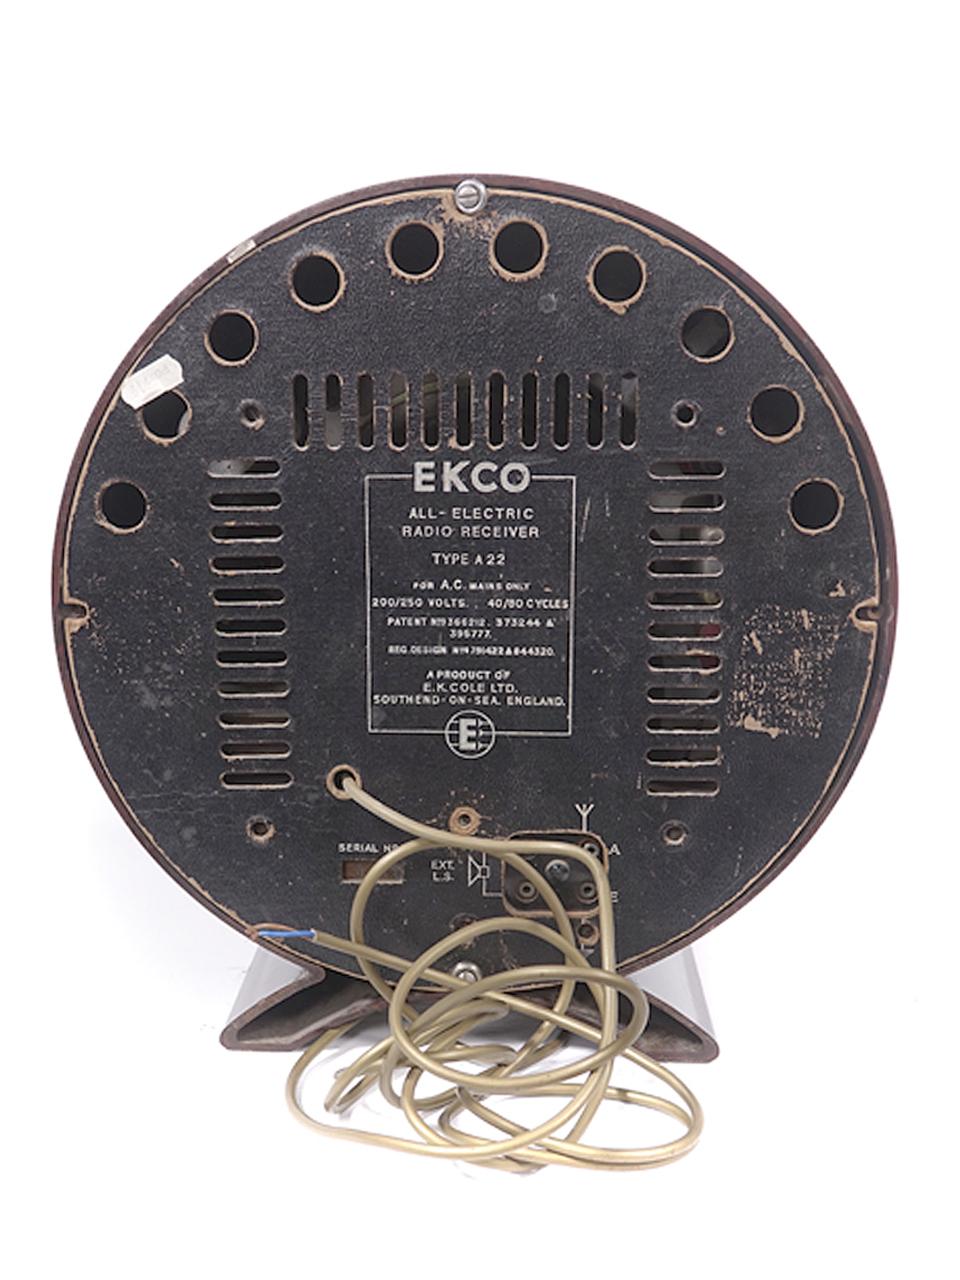 The radio manufactured by British firm Ekco and introduced in 1945 is one of the most iconic of all radio designs, famous for the circular Art Deco case. Originally designed in the early 1930s by the modernist architect Wells Coates (1895-1958), the